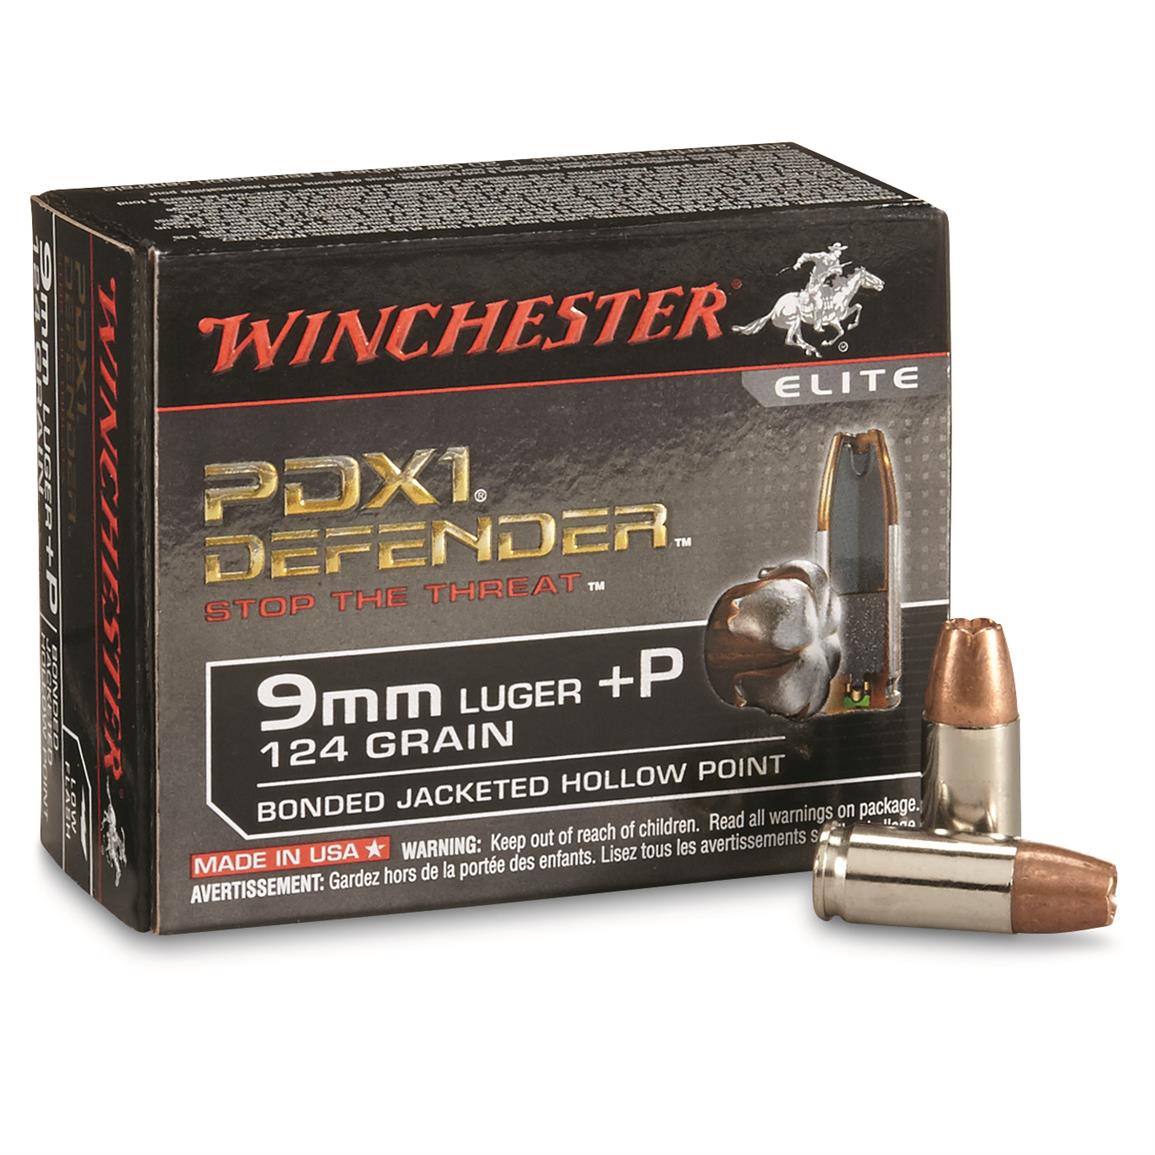 Winchester Defender, 9mm Luger+P, Bonded Jacketed Hollow Point, 124 Grain, 20 Rounds